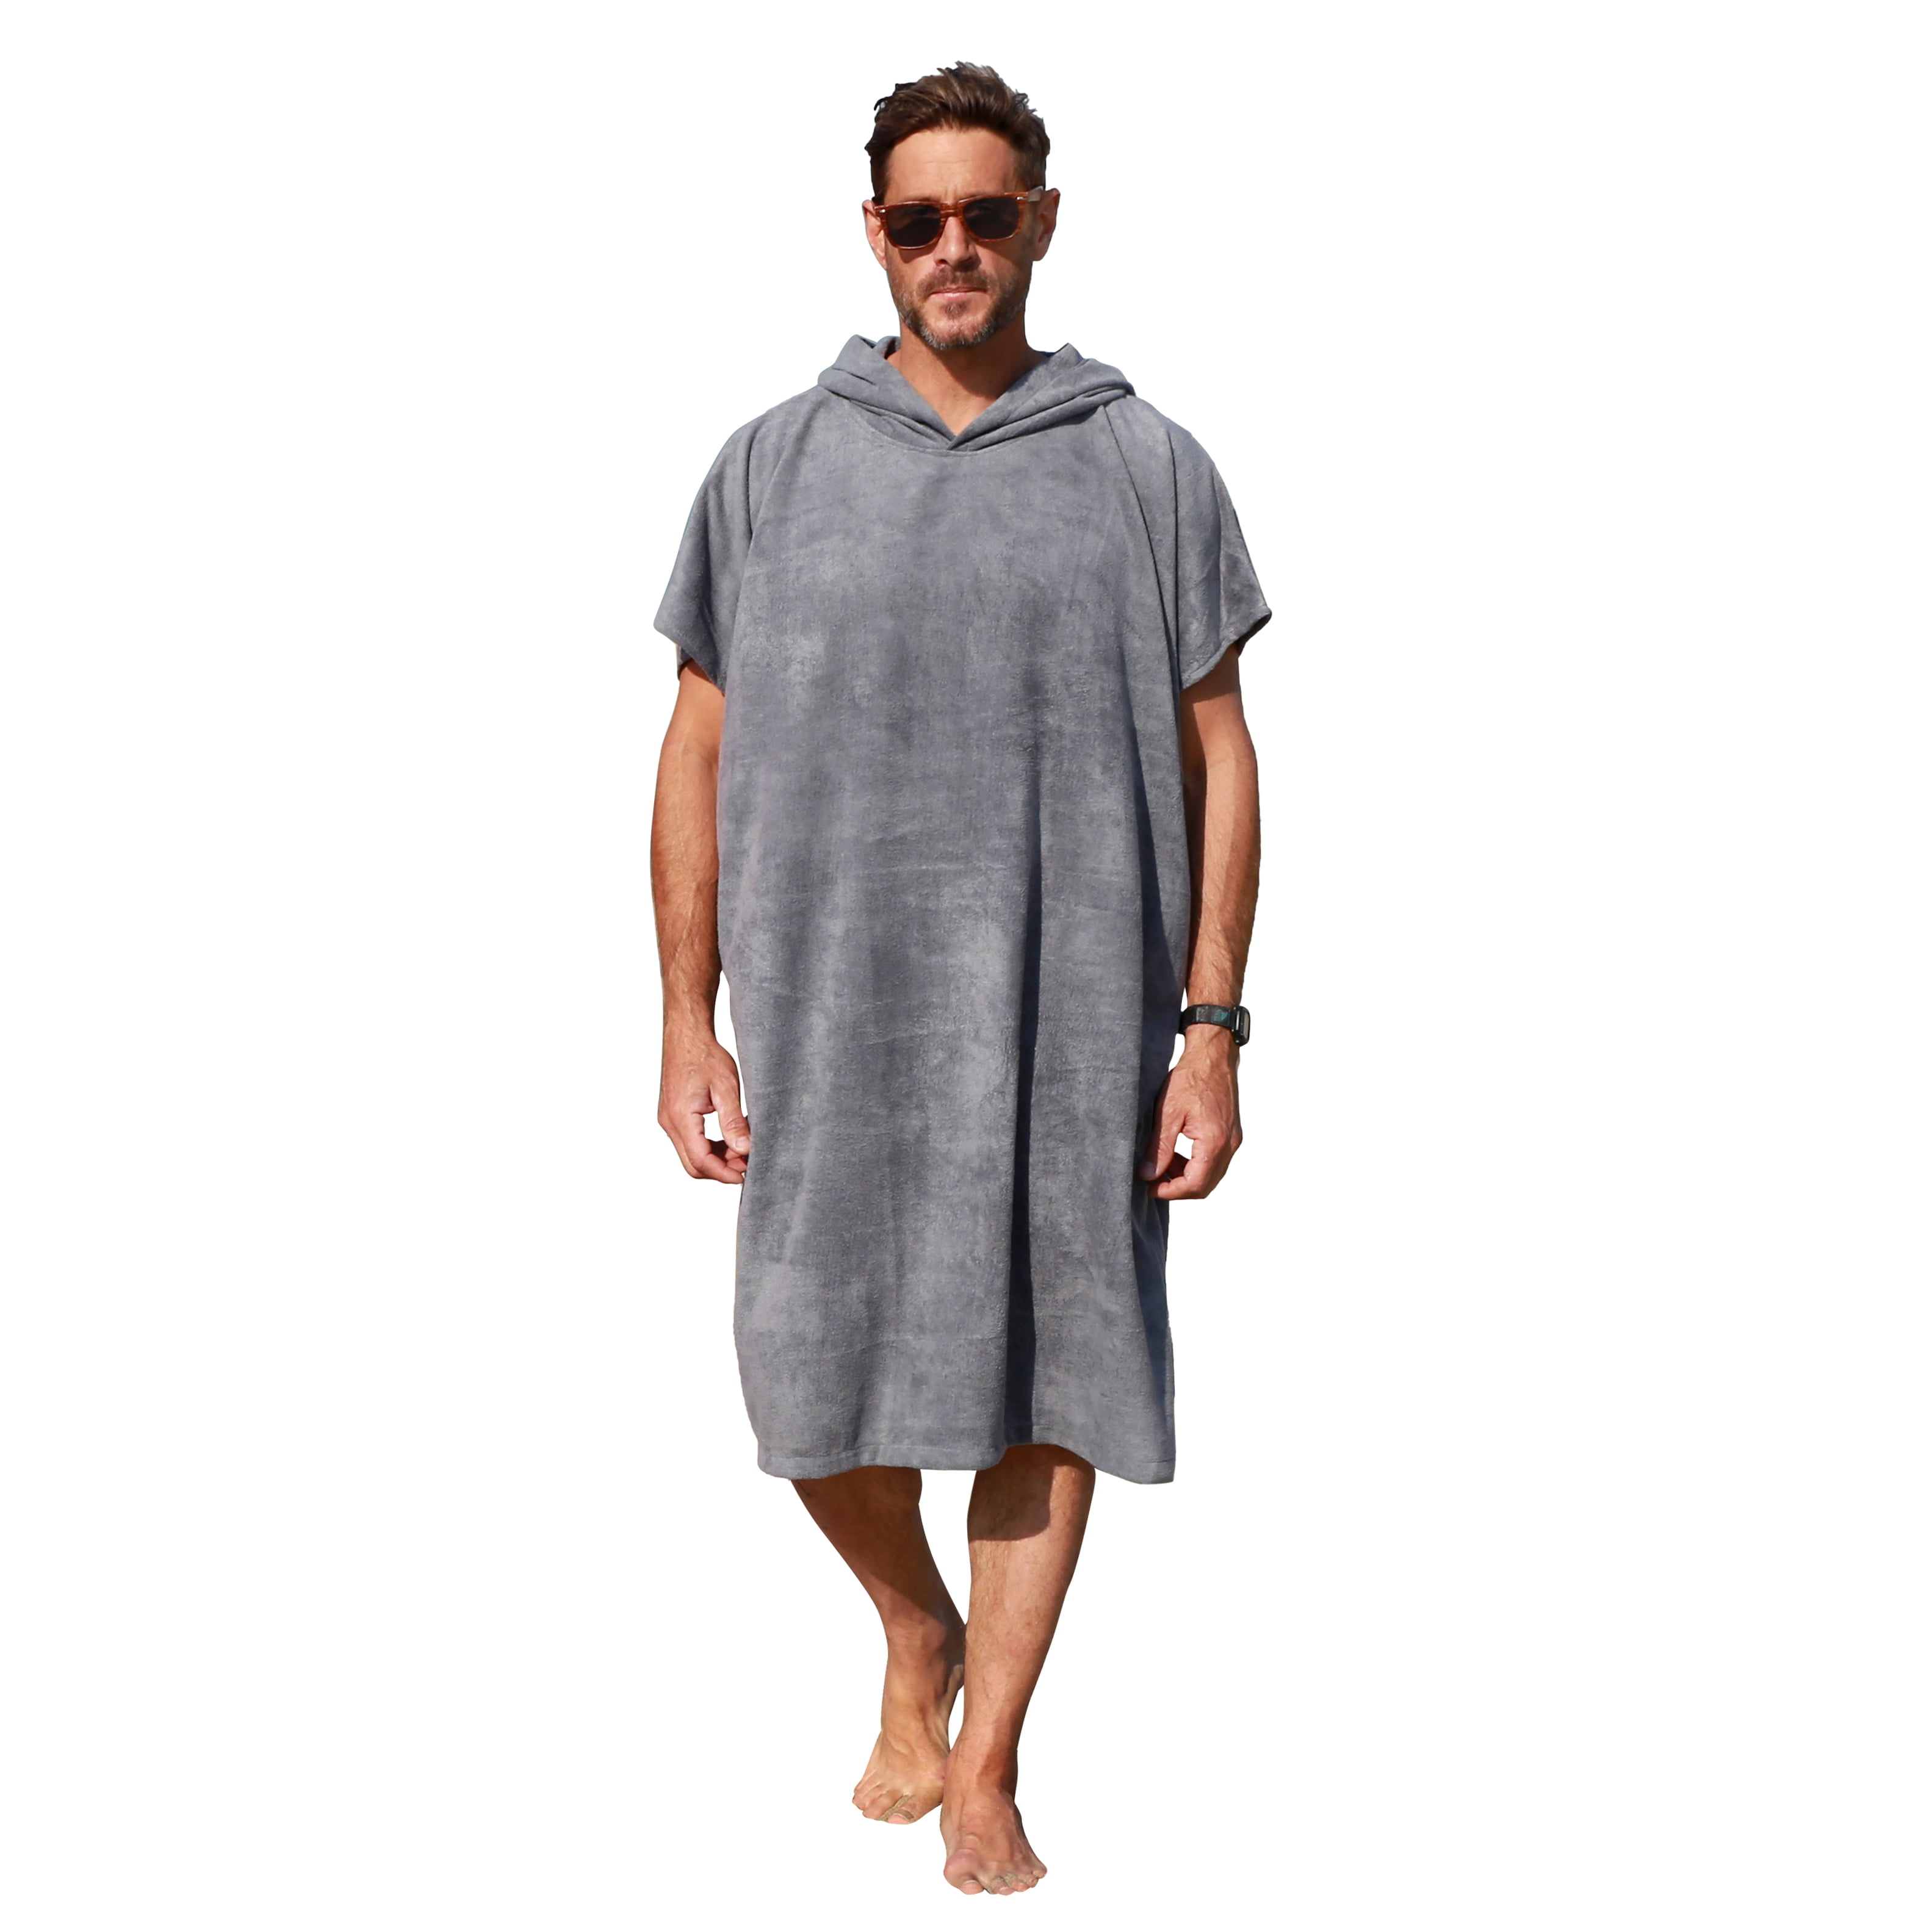 NEW Poncho Towel Microfiber Surf Poncho Robe With Hood Changing Wetsuit Surfer 